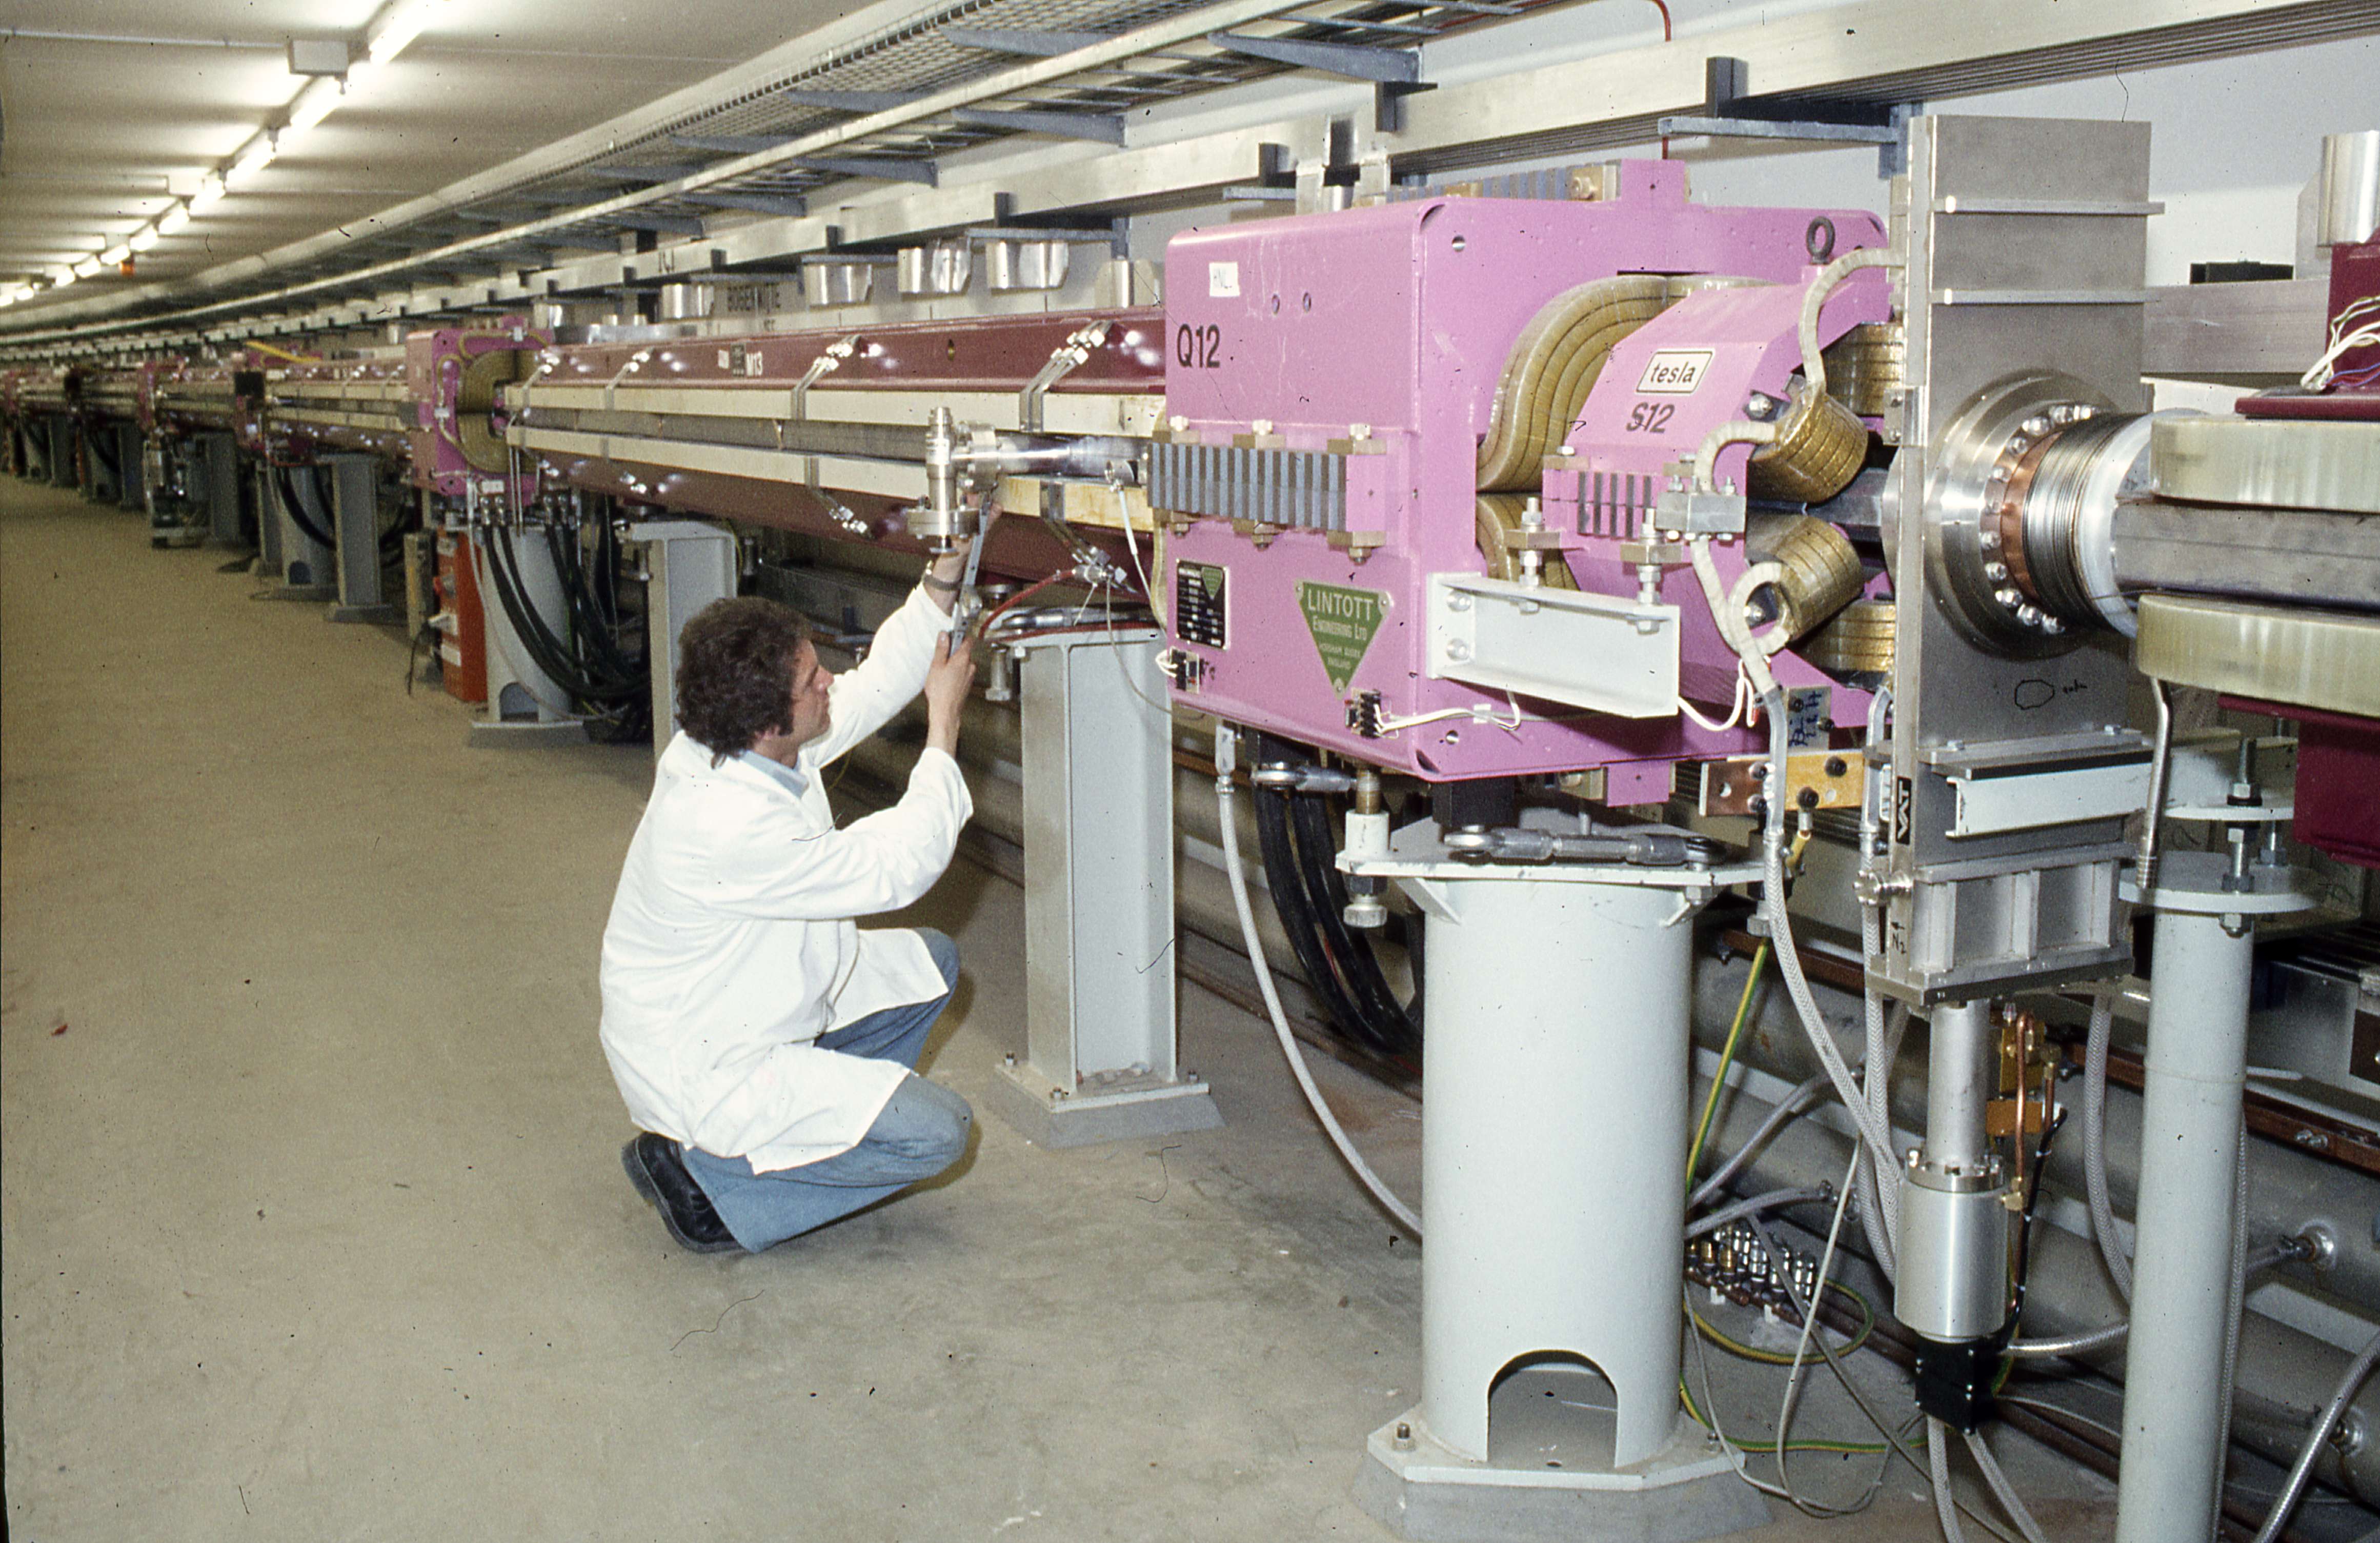 A person crouches in a white lab coat and jeans and inspects the PETRA accelerator at DESY.